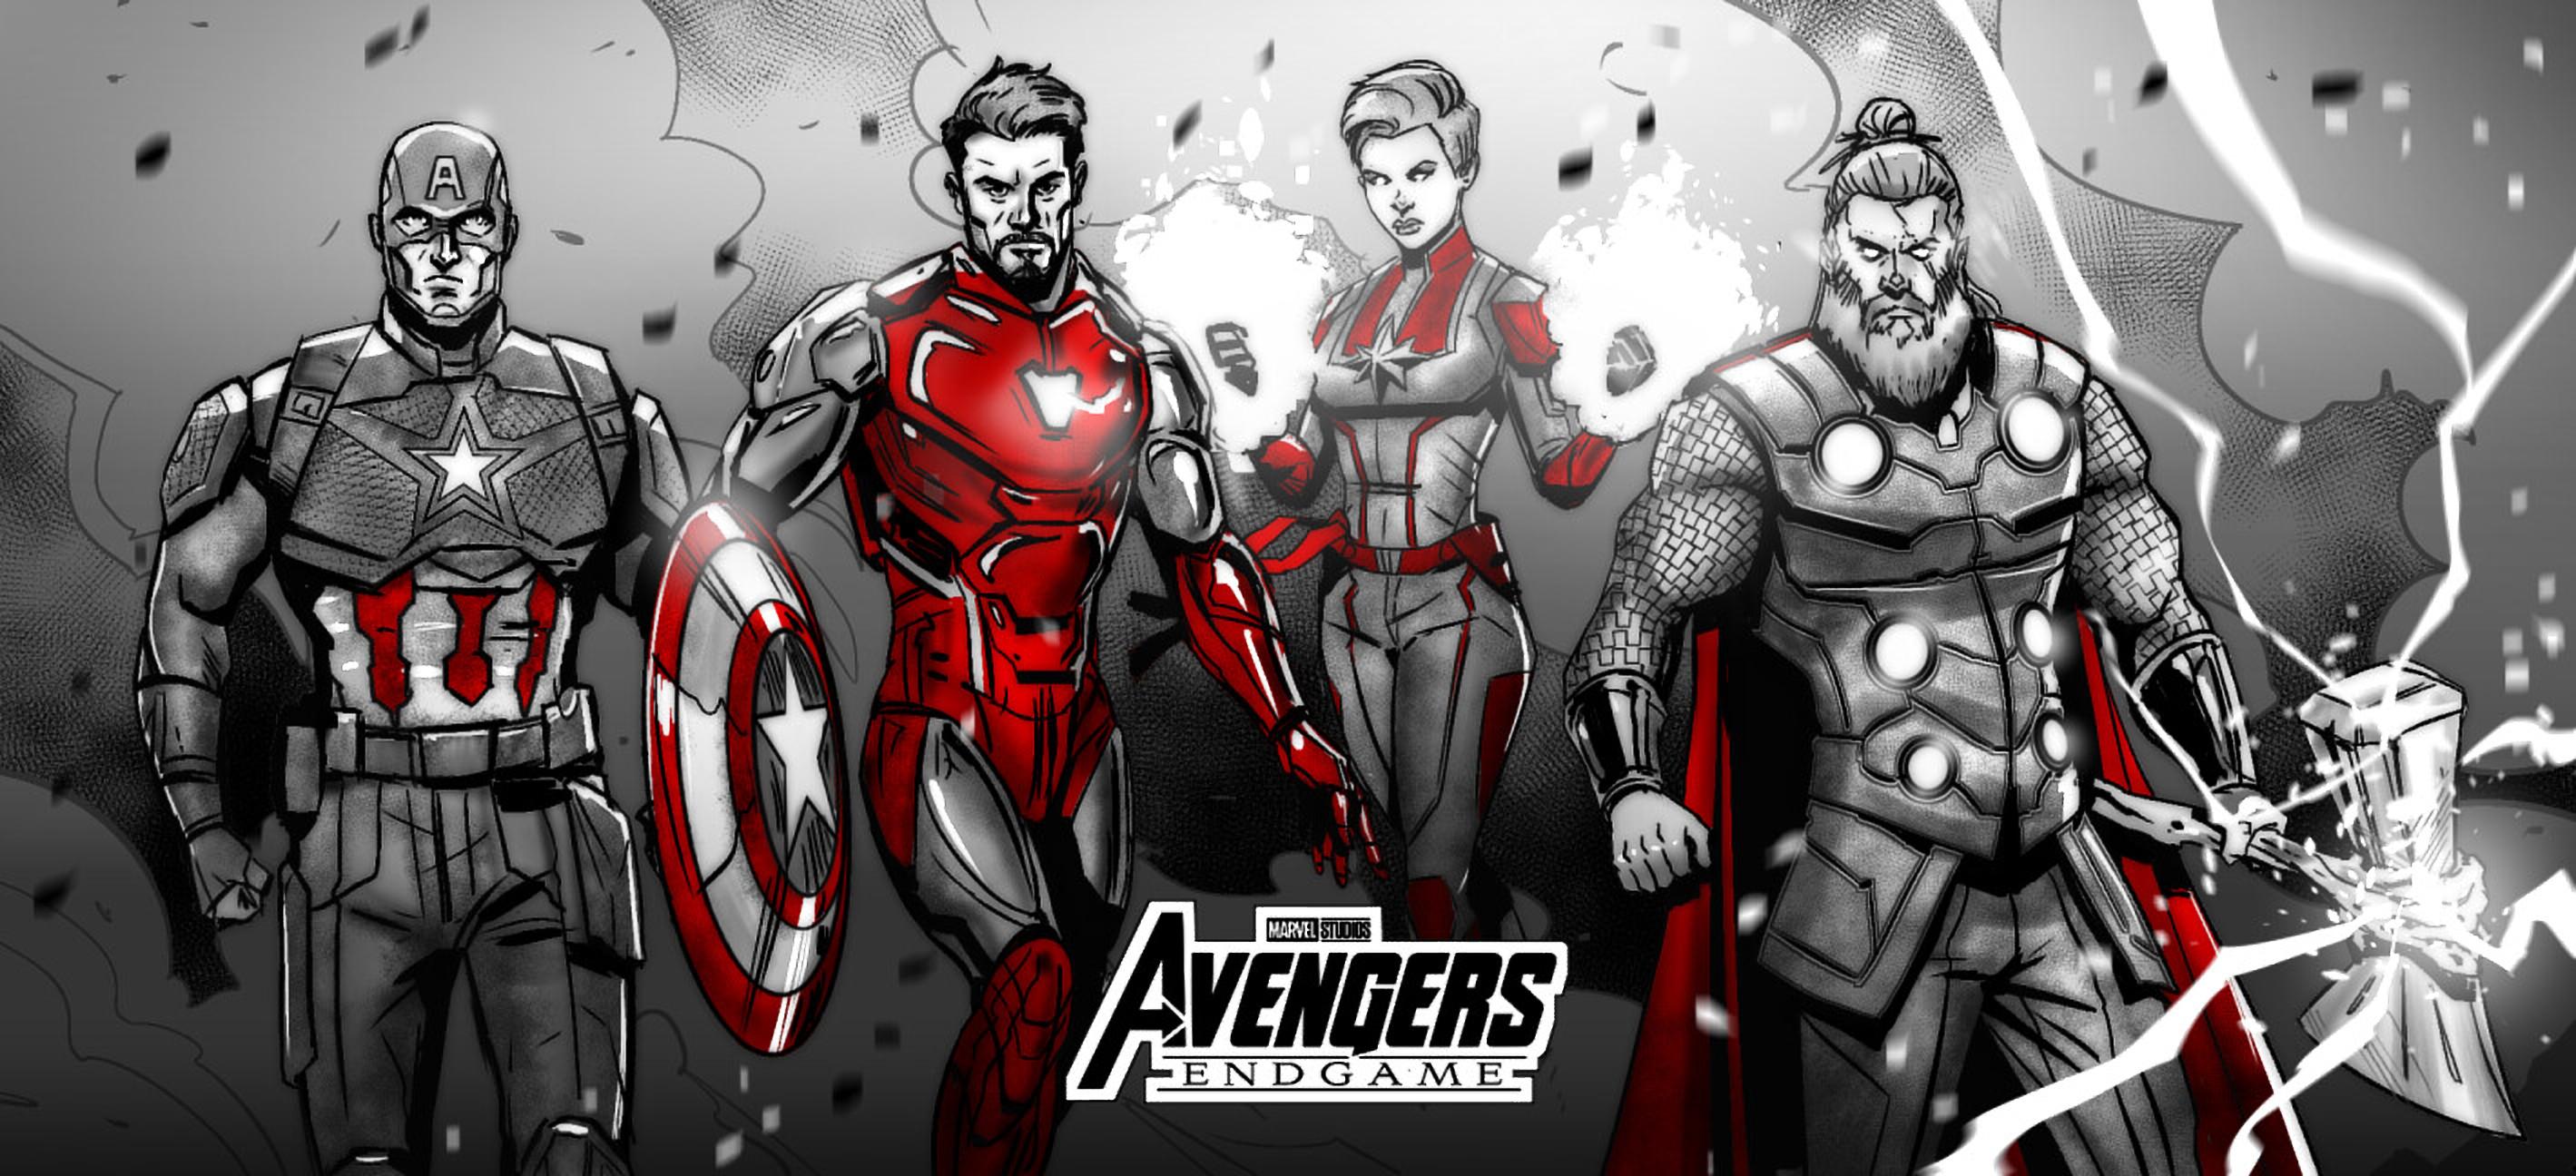 Avengers Endgame Quantum Realm Suits by Gaugex Frank Wallpaper and Free